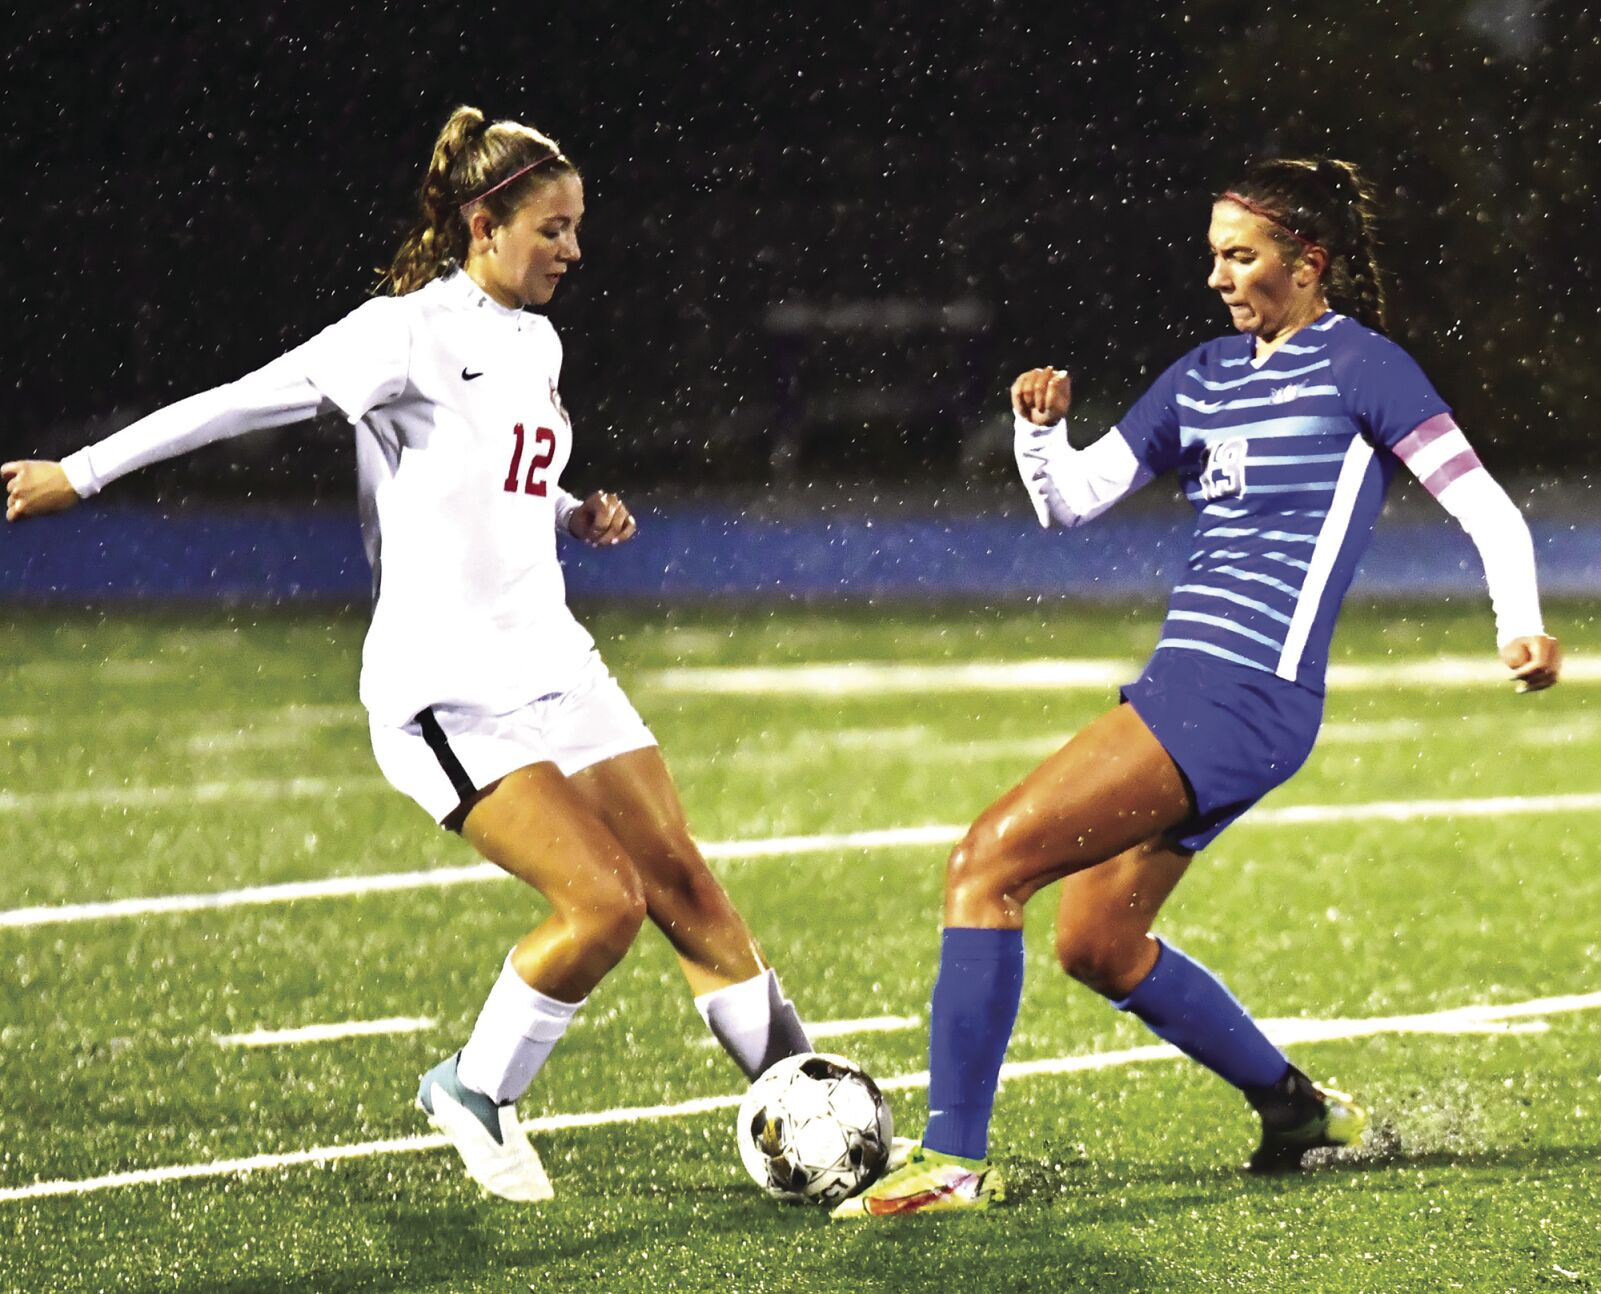 Seasons come to a close for Wings and Hawks soccer teams